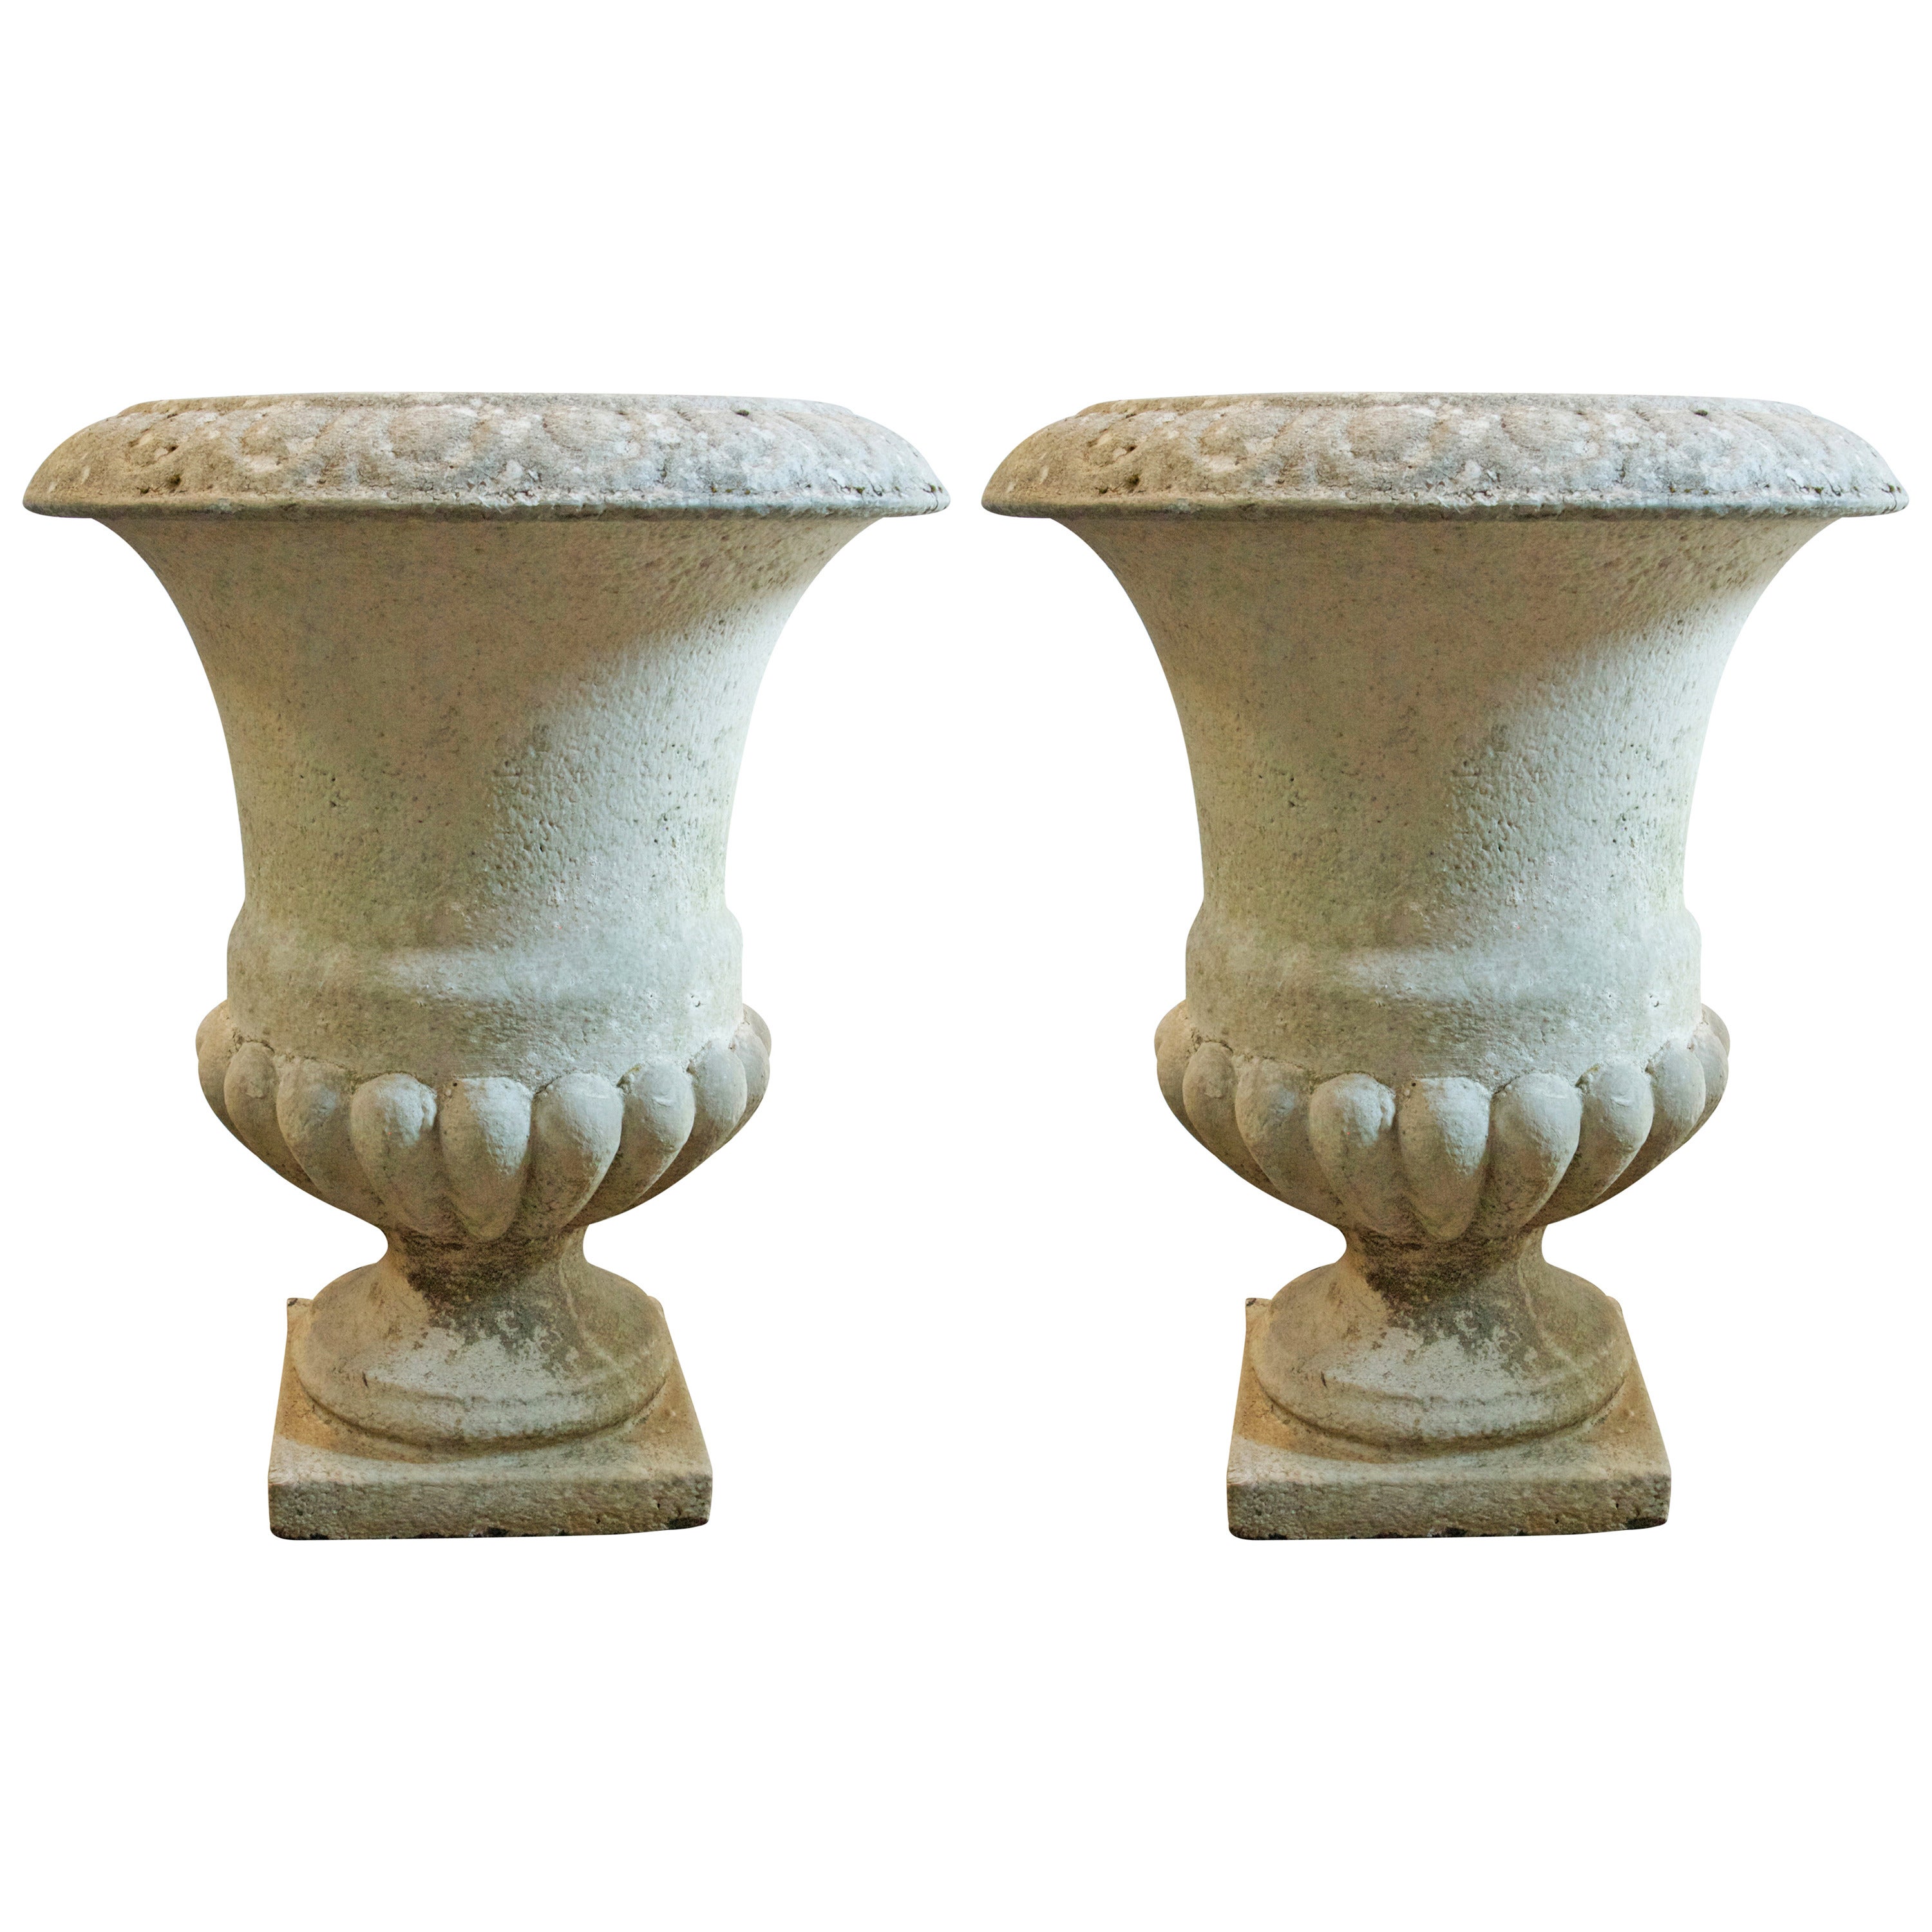 Pair of French Cast Stone Campana Urns